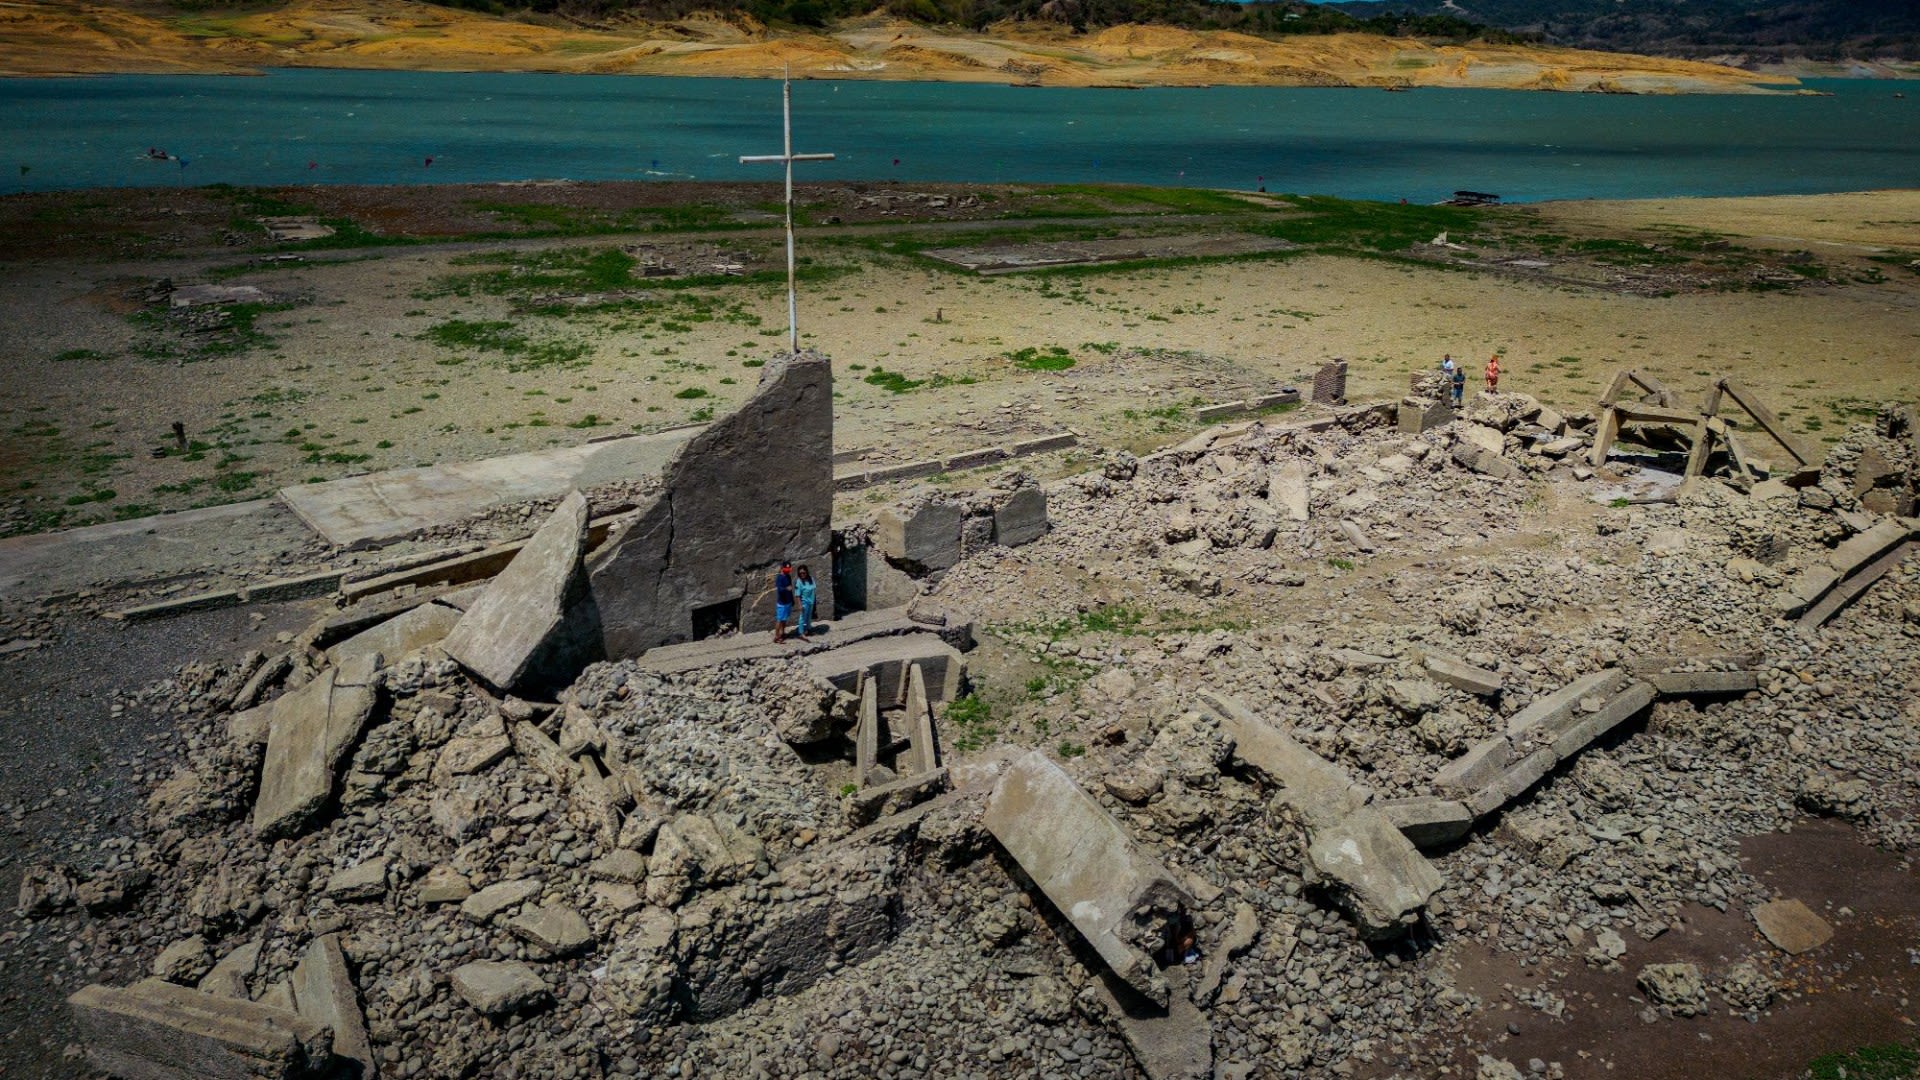 Mysterious sunken town re-emerges in dried up lake as ruins loom out from mud